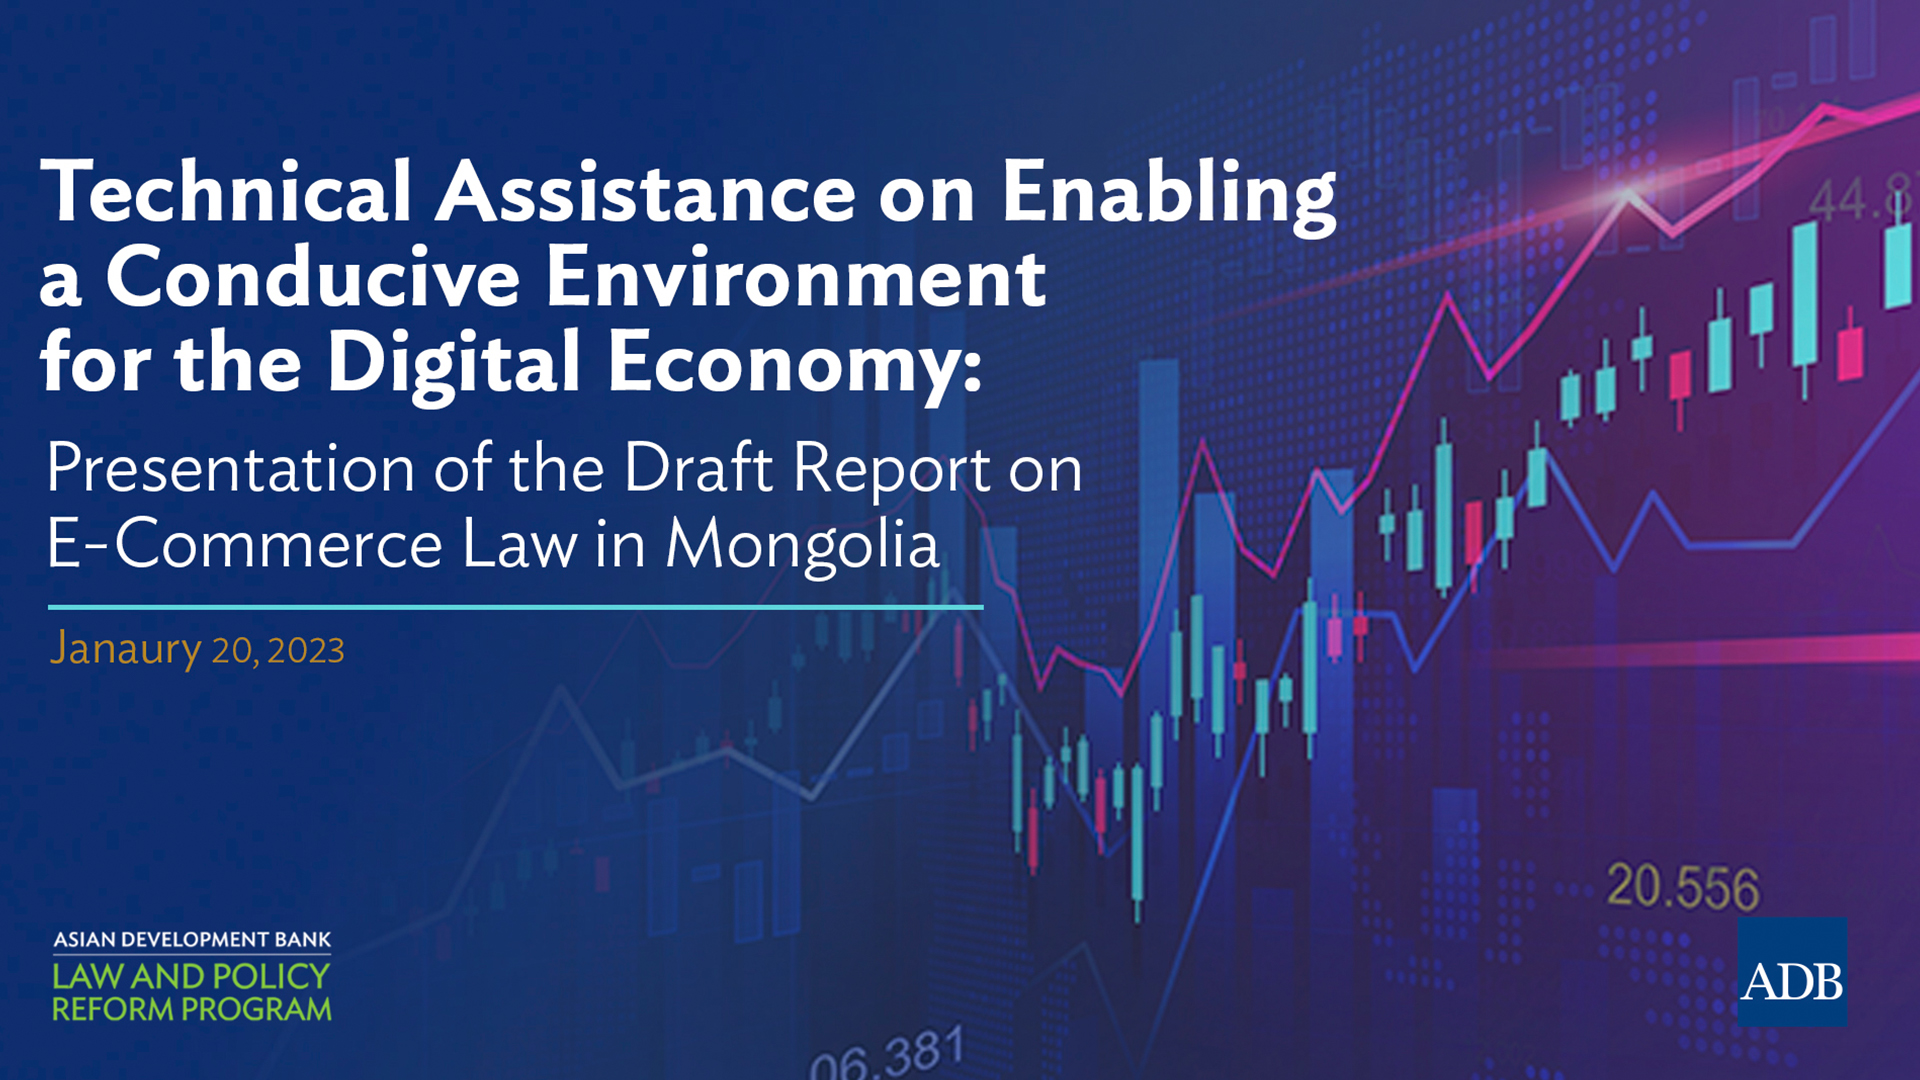 Presentation of the Draft Report on E-commerce Law in Mongolia